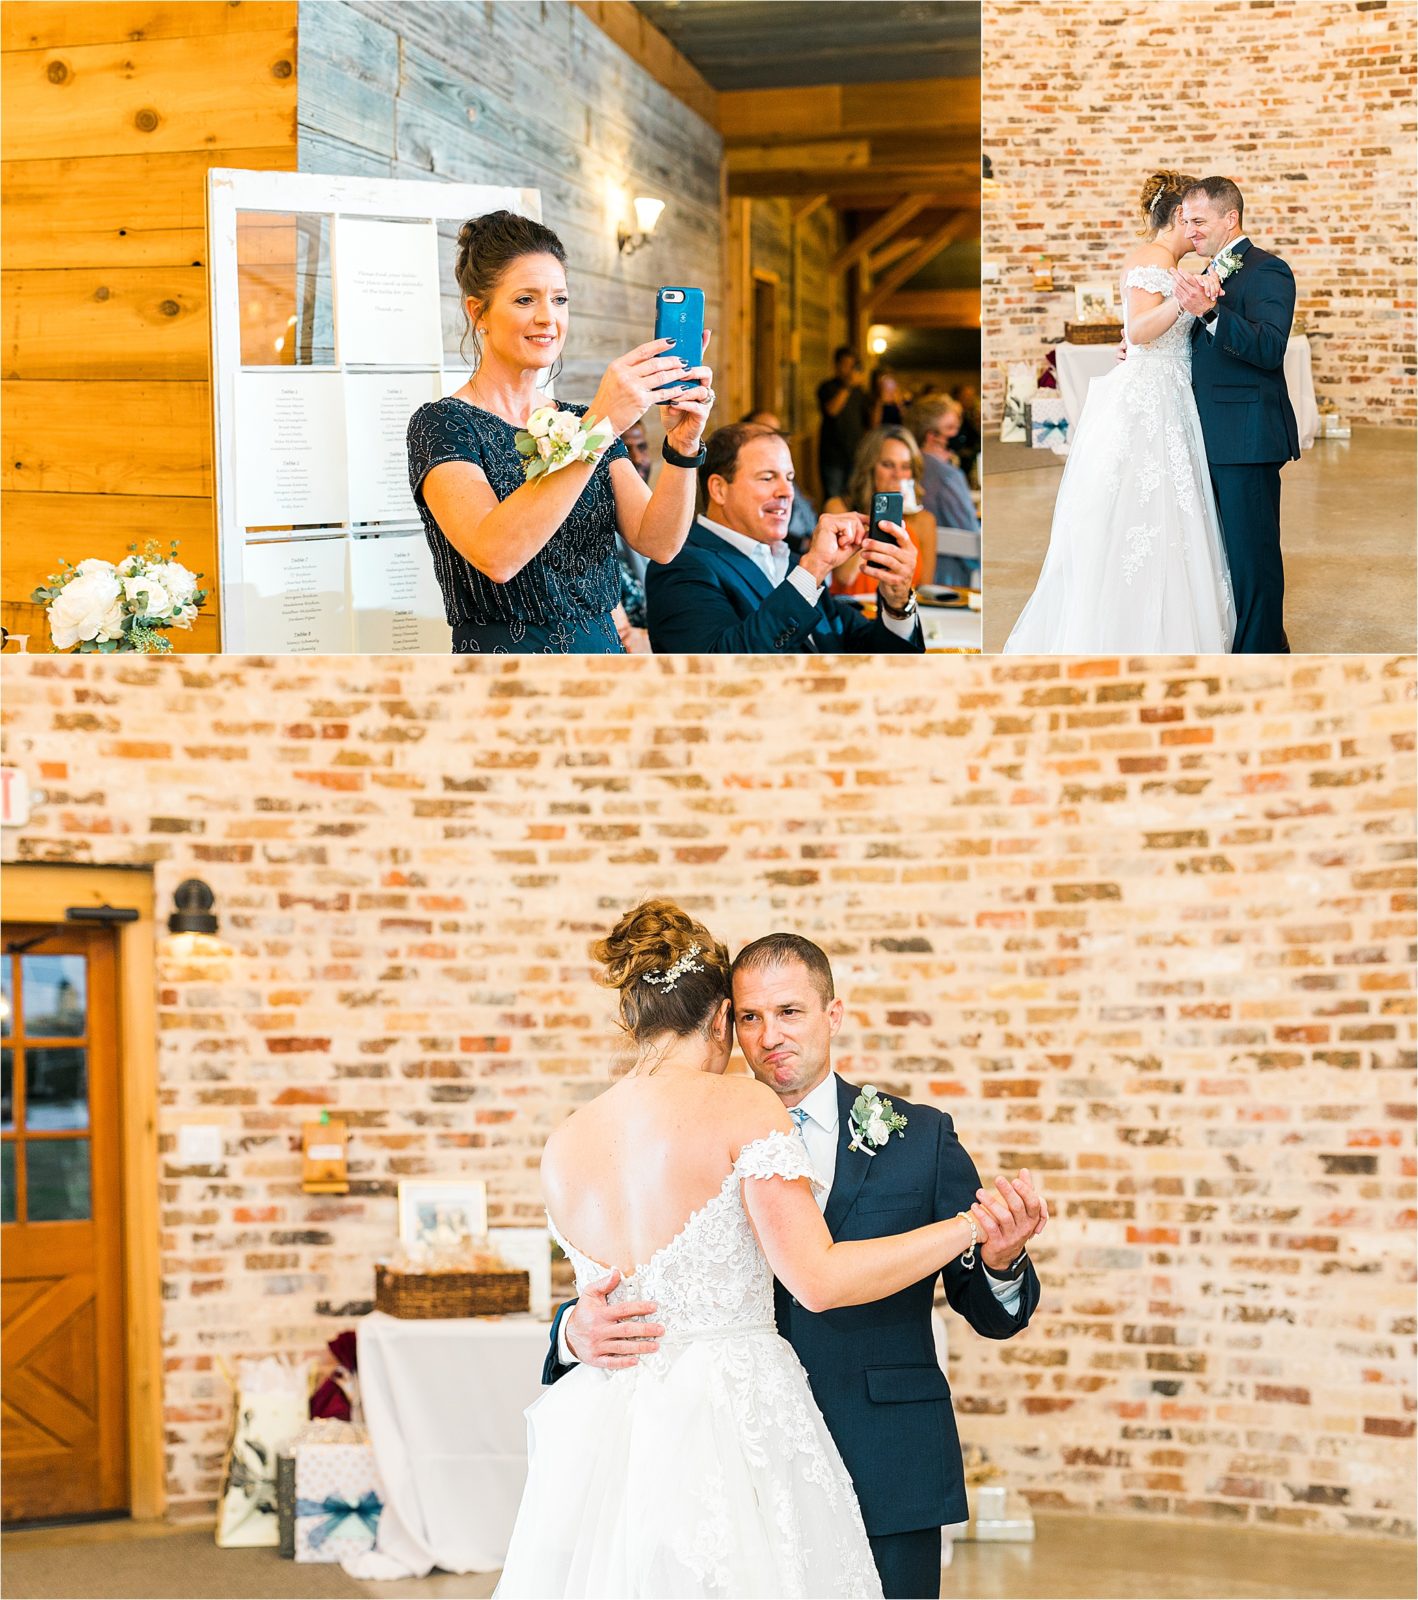 An emotional father-daughter dance at Rustic Grace Estate as the mother of the bride looks on and takes photos